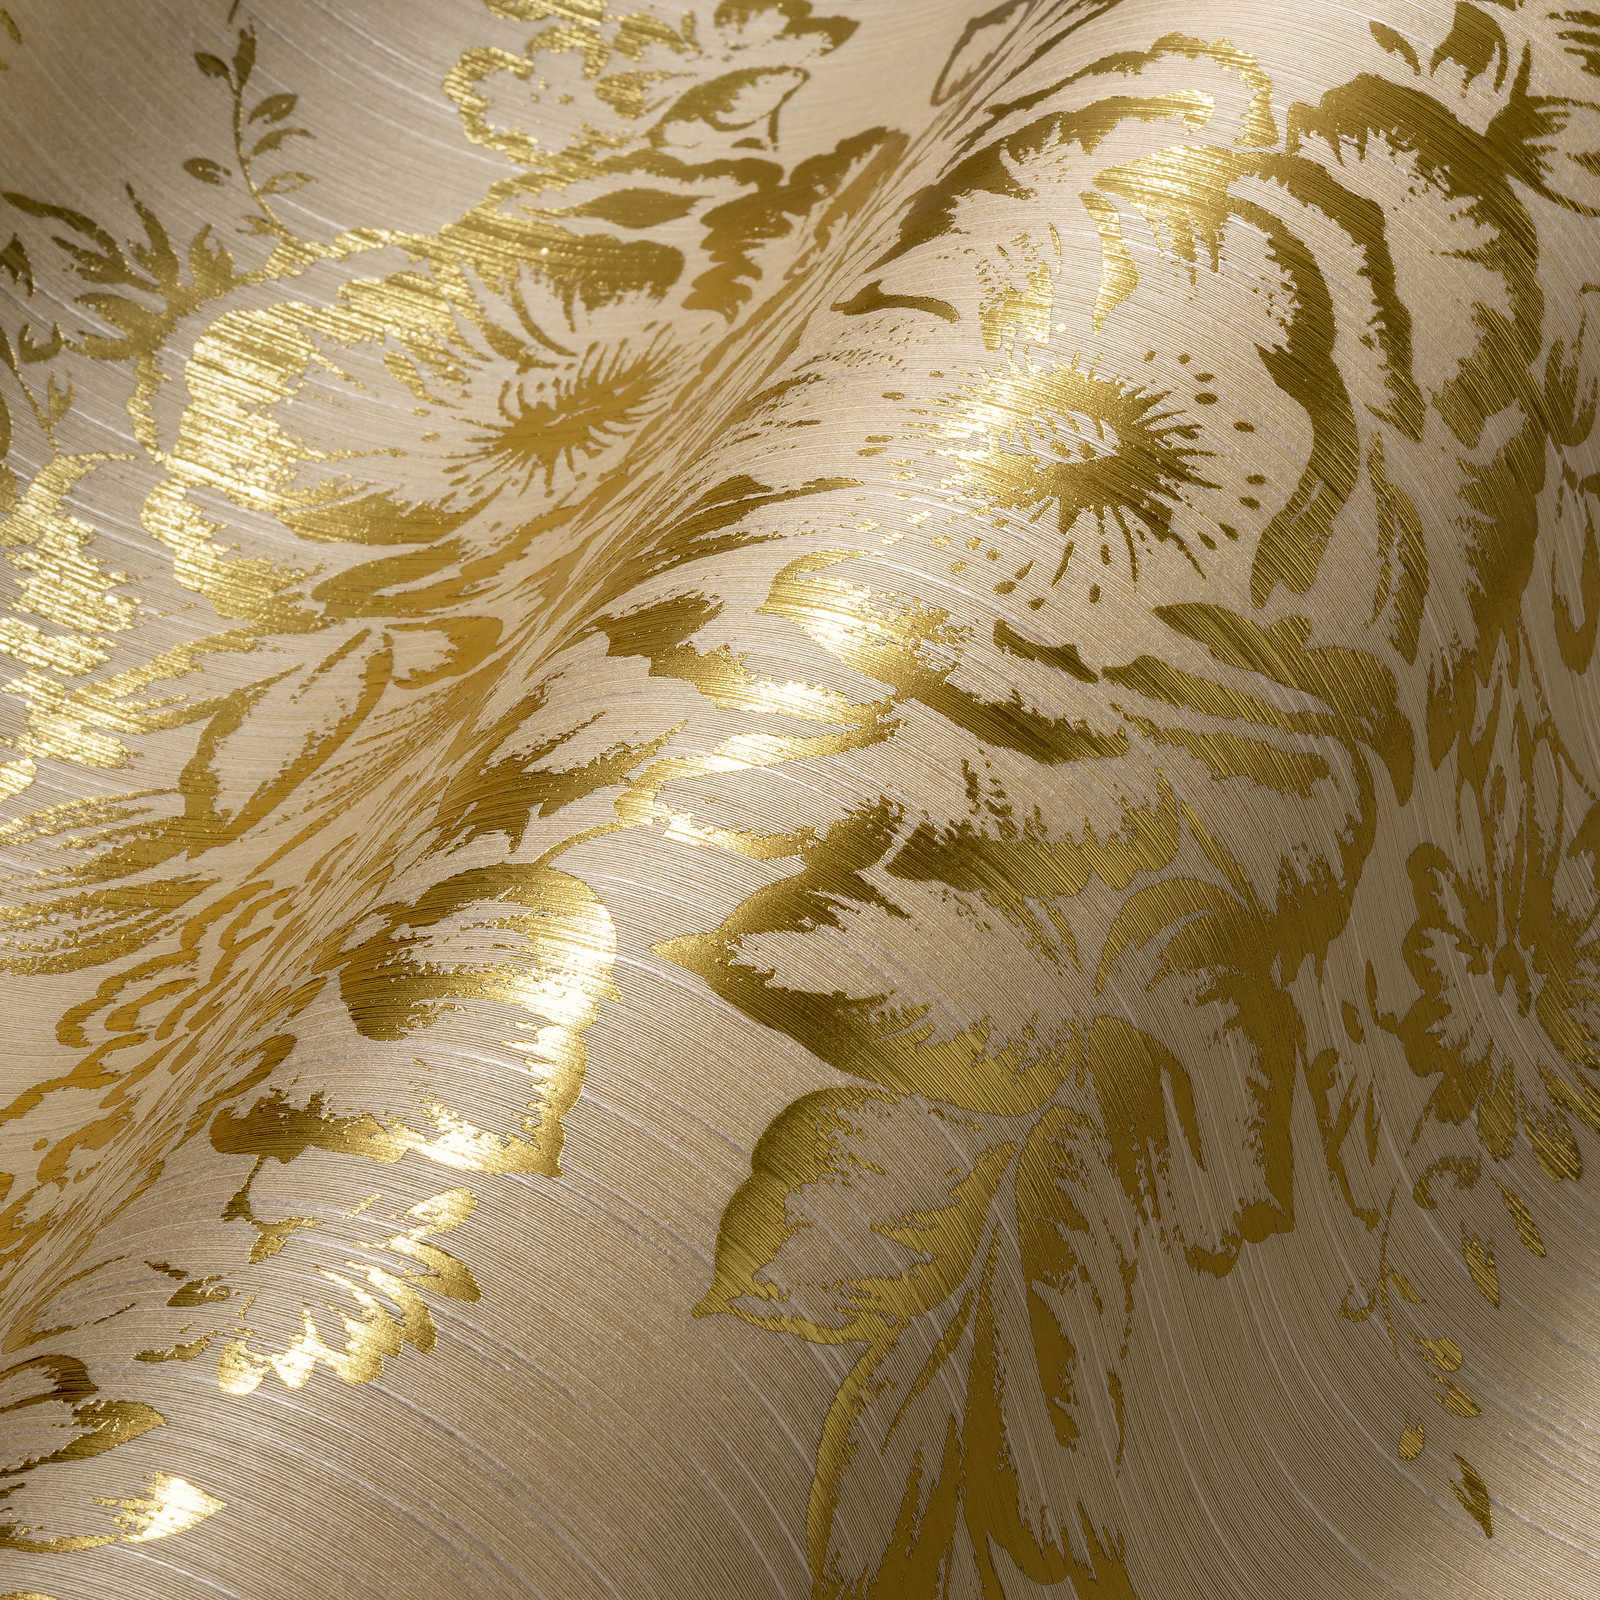             Textured wallpaper with gold floral pattern - gold, cream
        